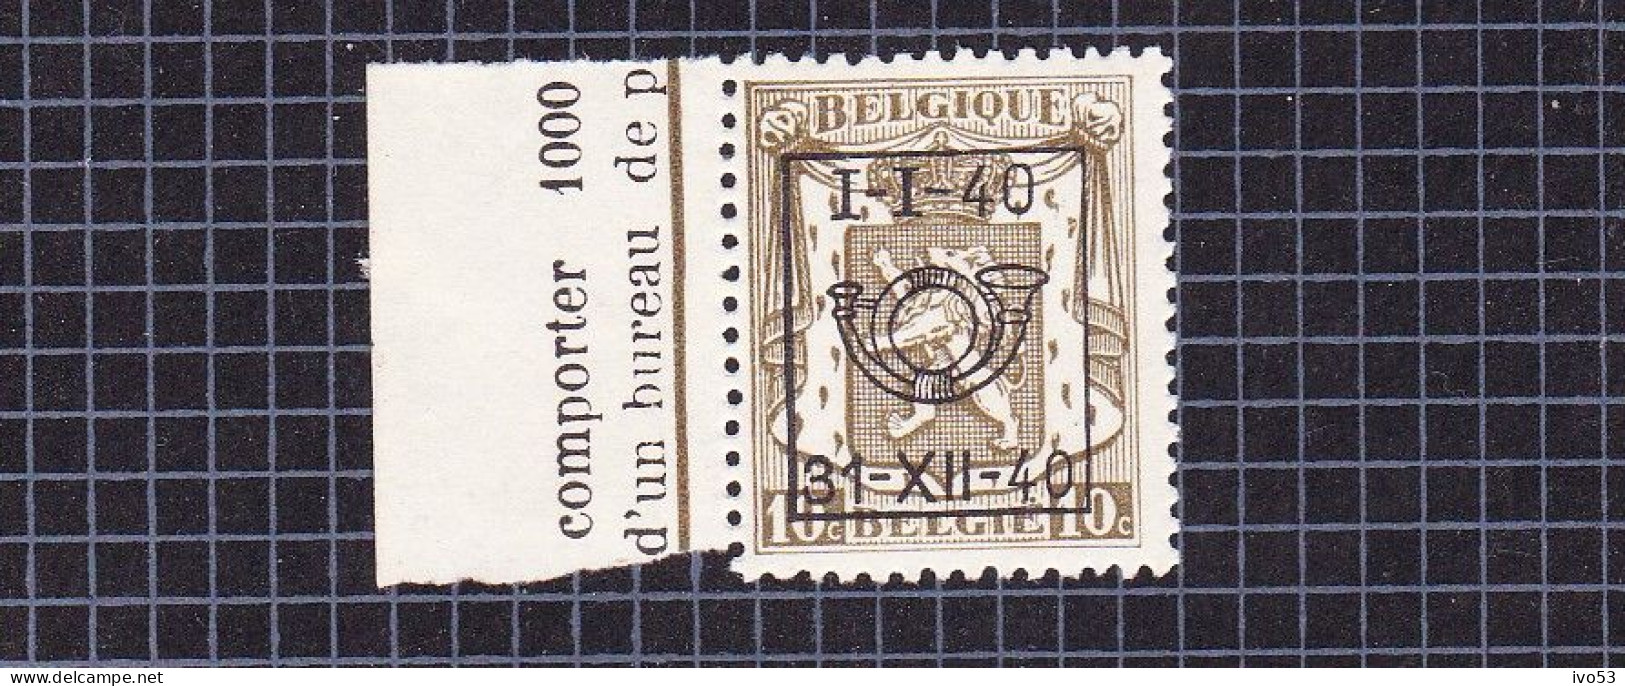 1940 Nr PRE439** Zonder Scharnier.Klein Staatswapen:10c.Opdruk :I-I-40/31-XII-40.OBP:7,5 Euro. - Typo Precancels 1936-51 (Small Seal Of The State)